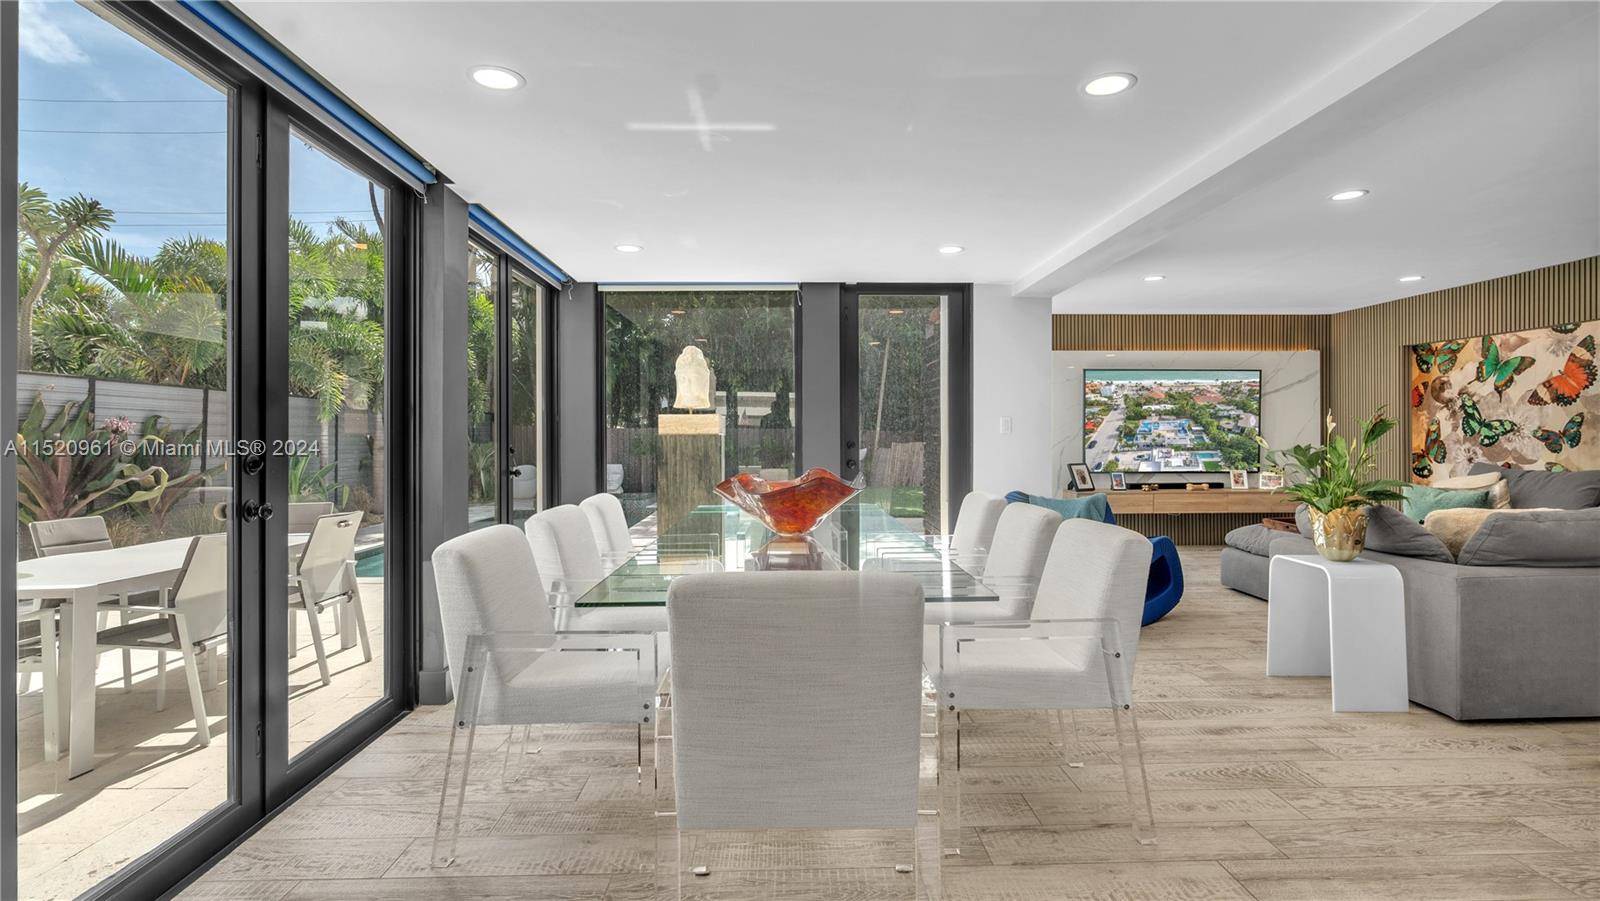 Presenting an exceptional and intricately crafted home in Fort Lauderdale Beach, this listing displays a creative flair in its interior design.